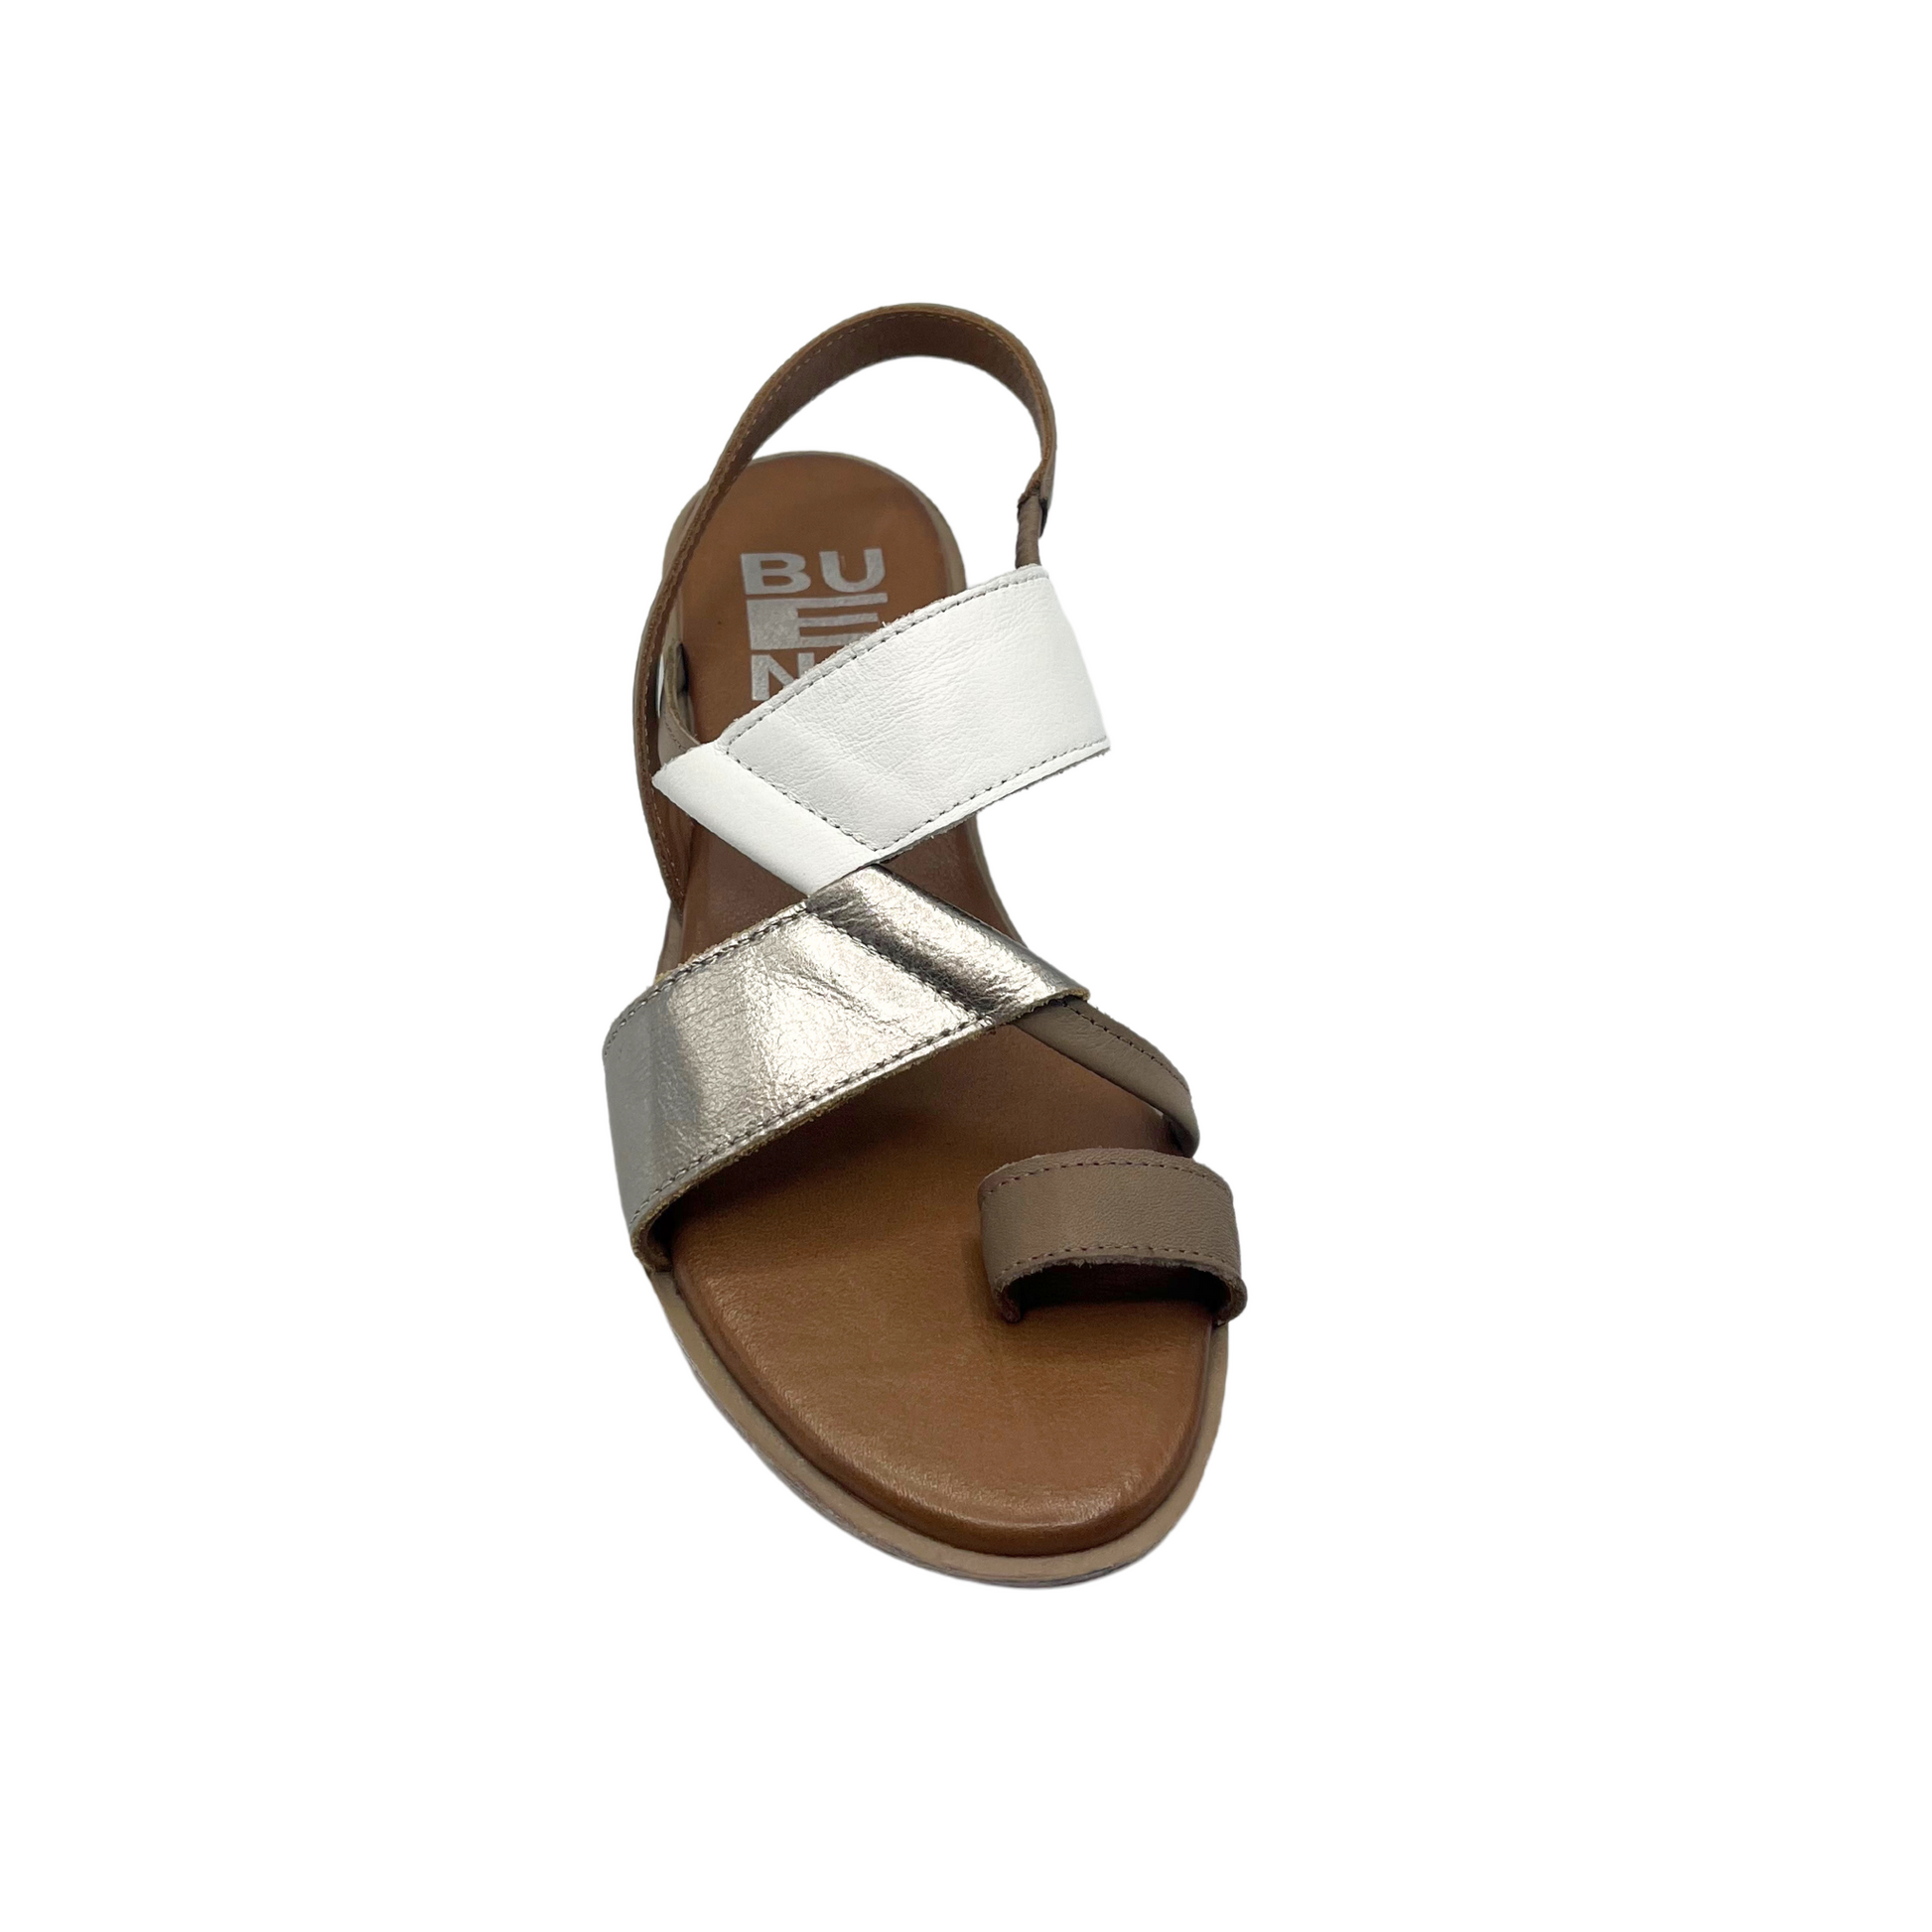 Top down view of a sandal in a combo of white, silver and brown leather.  Slip on style with elastic heel strap and toe loop